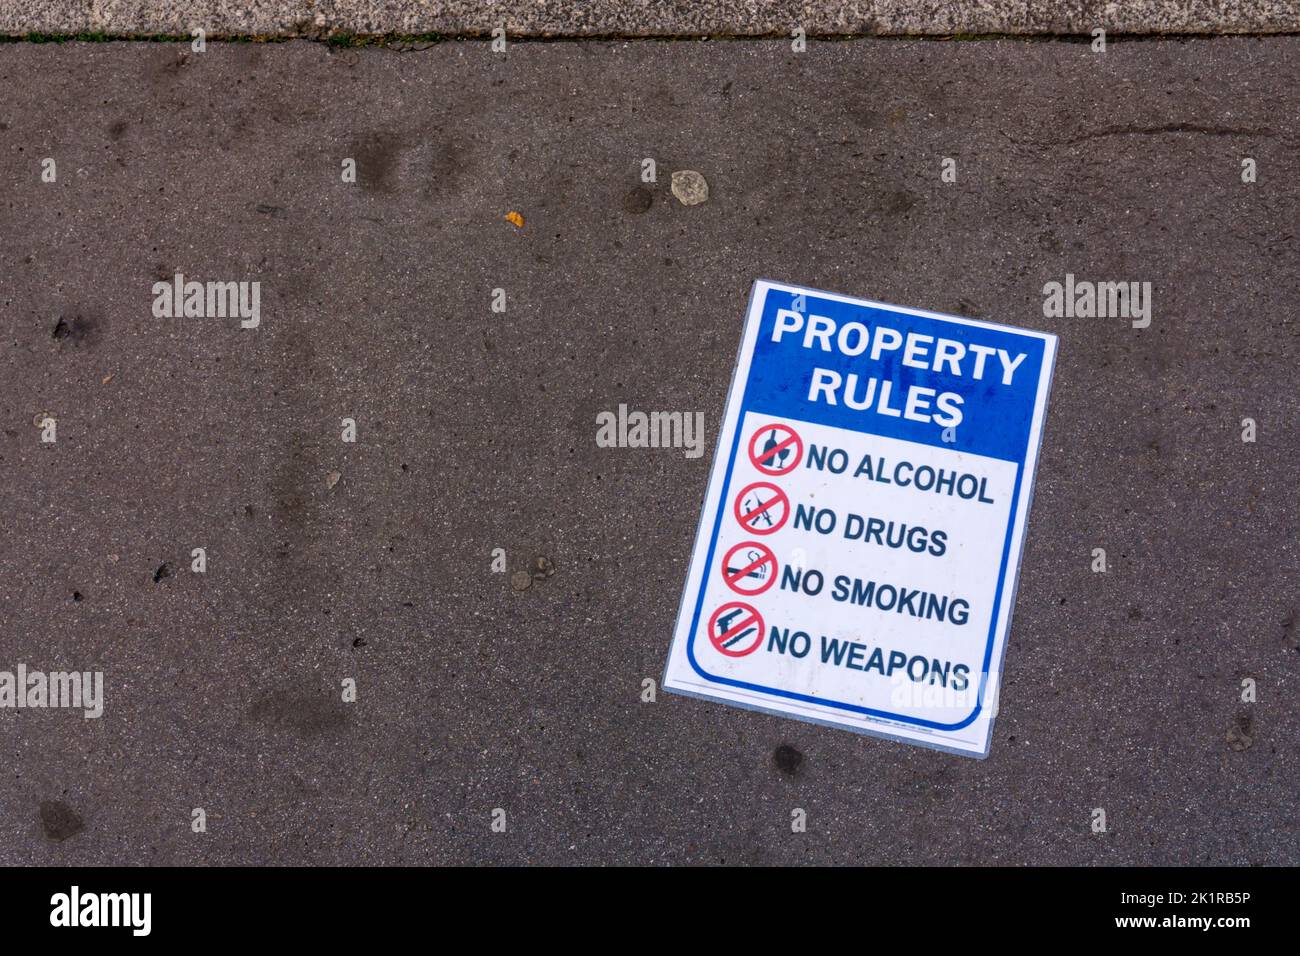 A sign on a London street lists the Propery Rules as No Alcohol, No Drugs, No Smoking and No Weapons. Stock Photo